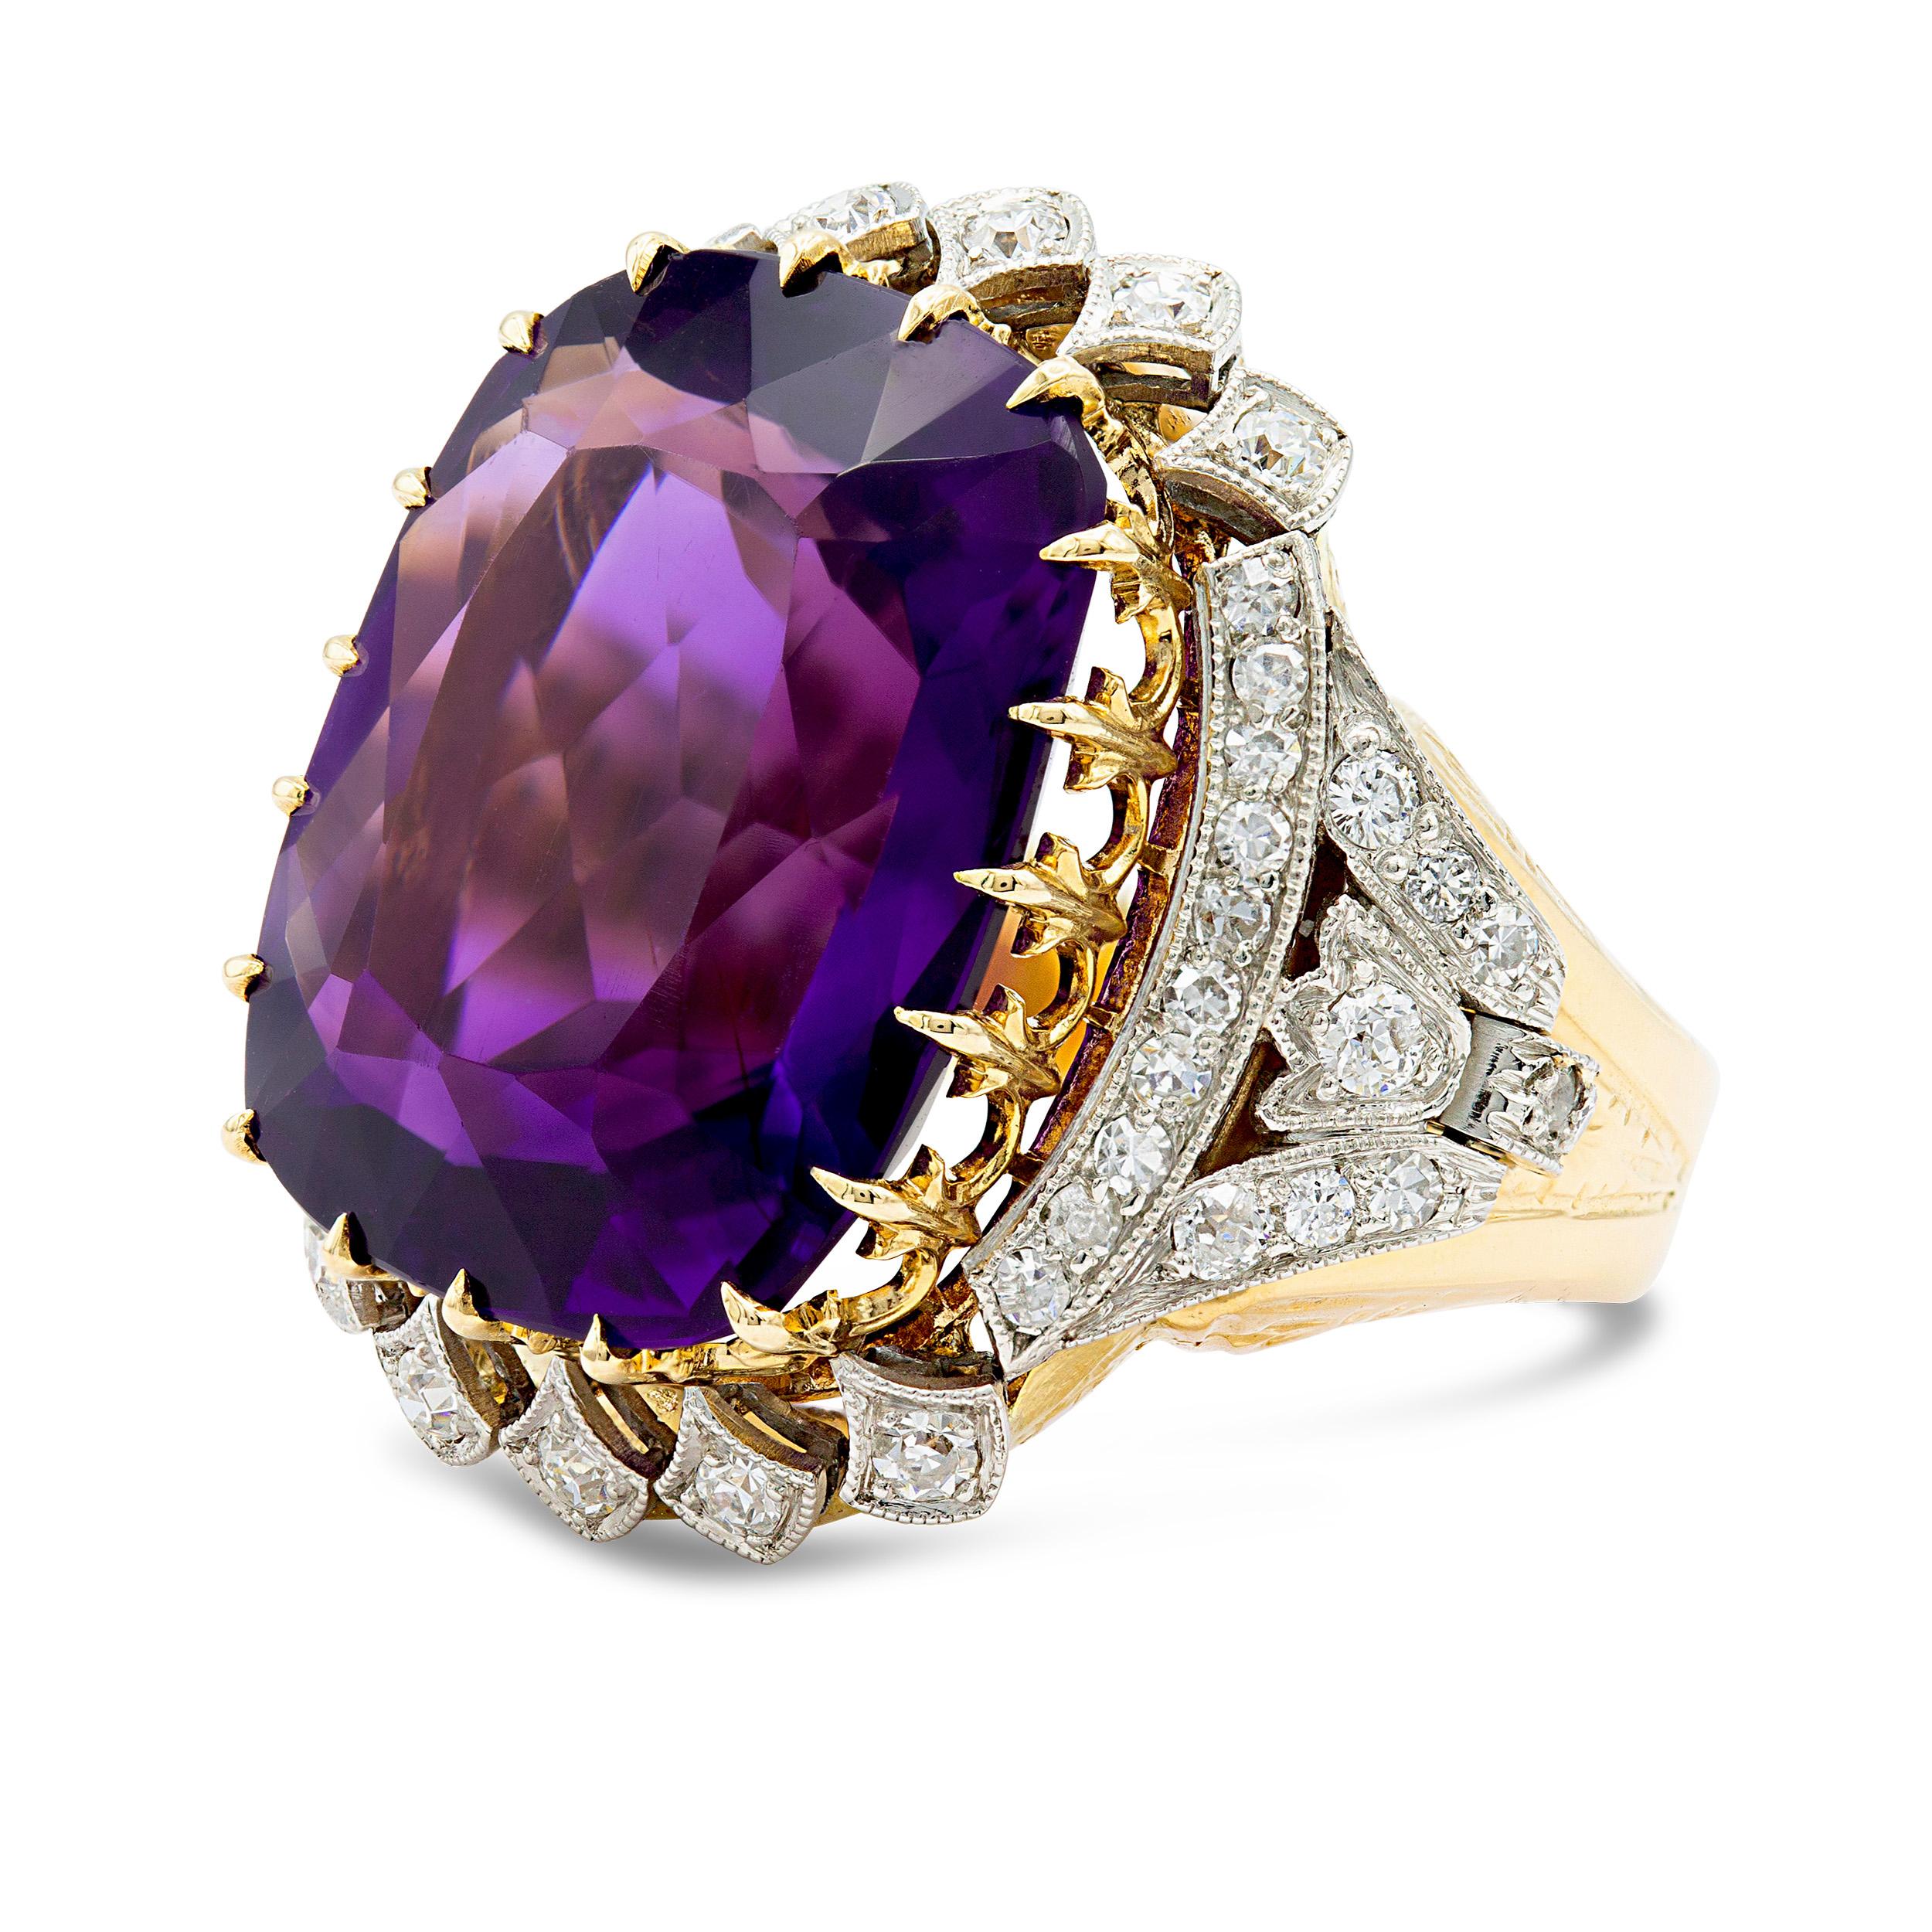 This cocktail ring is fit for royalty and has some serious retro vibes. A bevy of fleur de lis style prongs holds the substantial Amethyst at the center of this ornate ring. Between its two-tone setting, fine milgraine, and 48 accent diamonds, she's